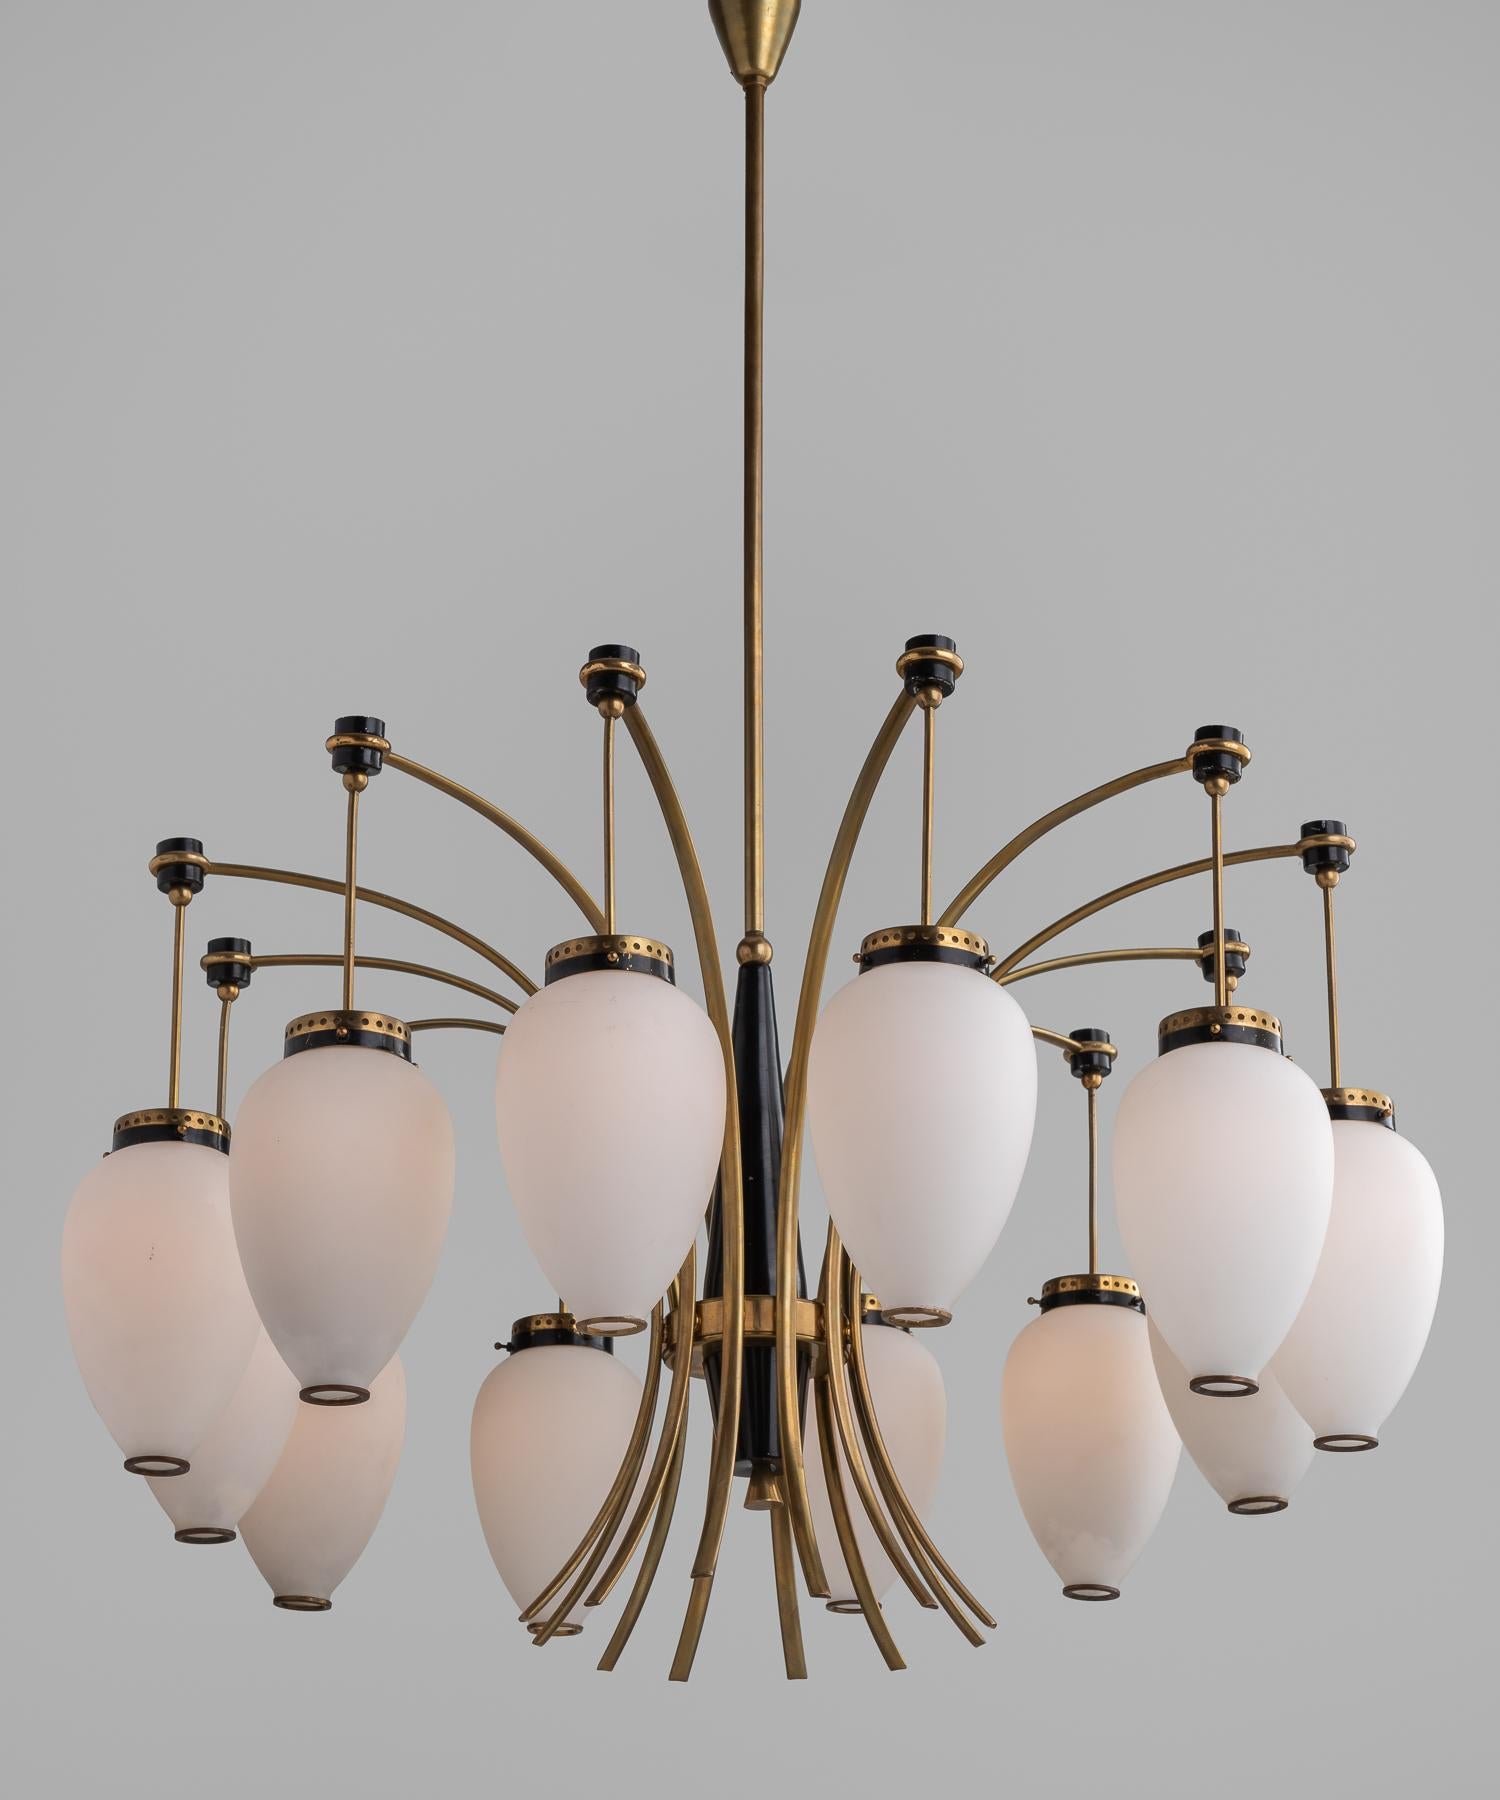 Twelve-arm opaline and brass chandelier, Italy, circa 1960.

Teardrop opaline glass shades hanging from brass arms.

